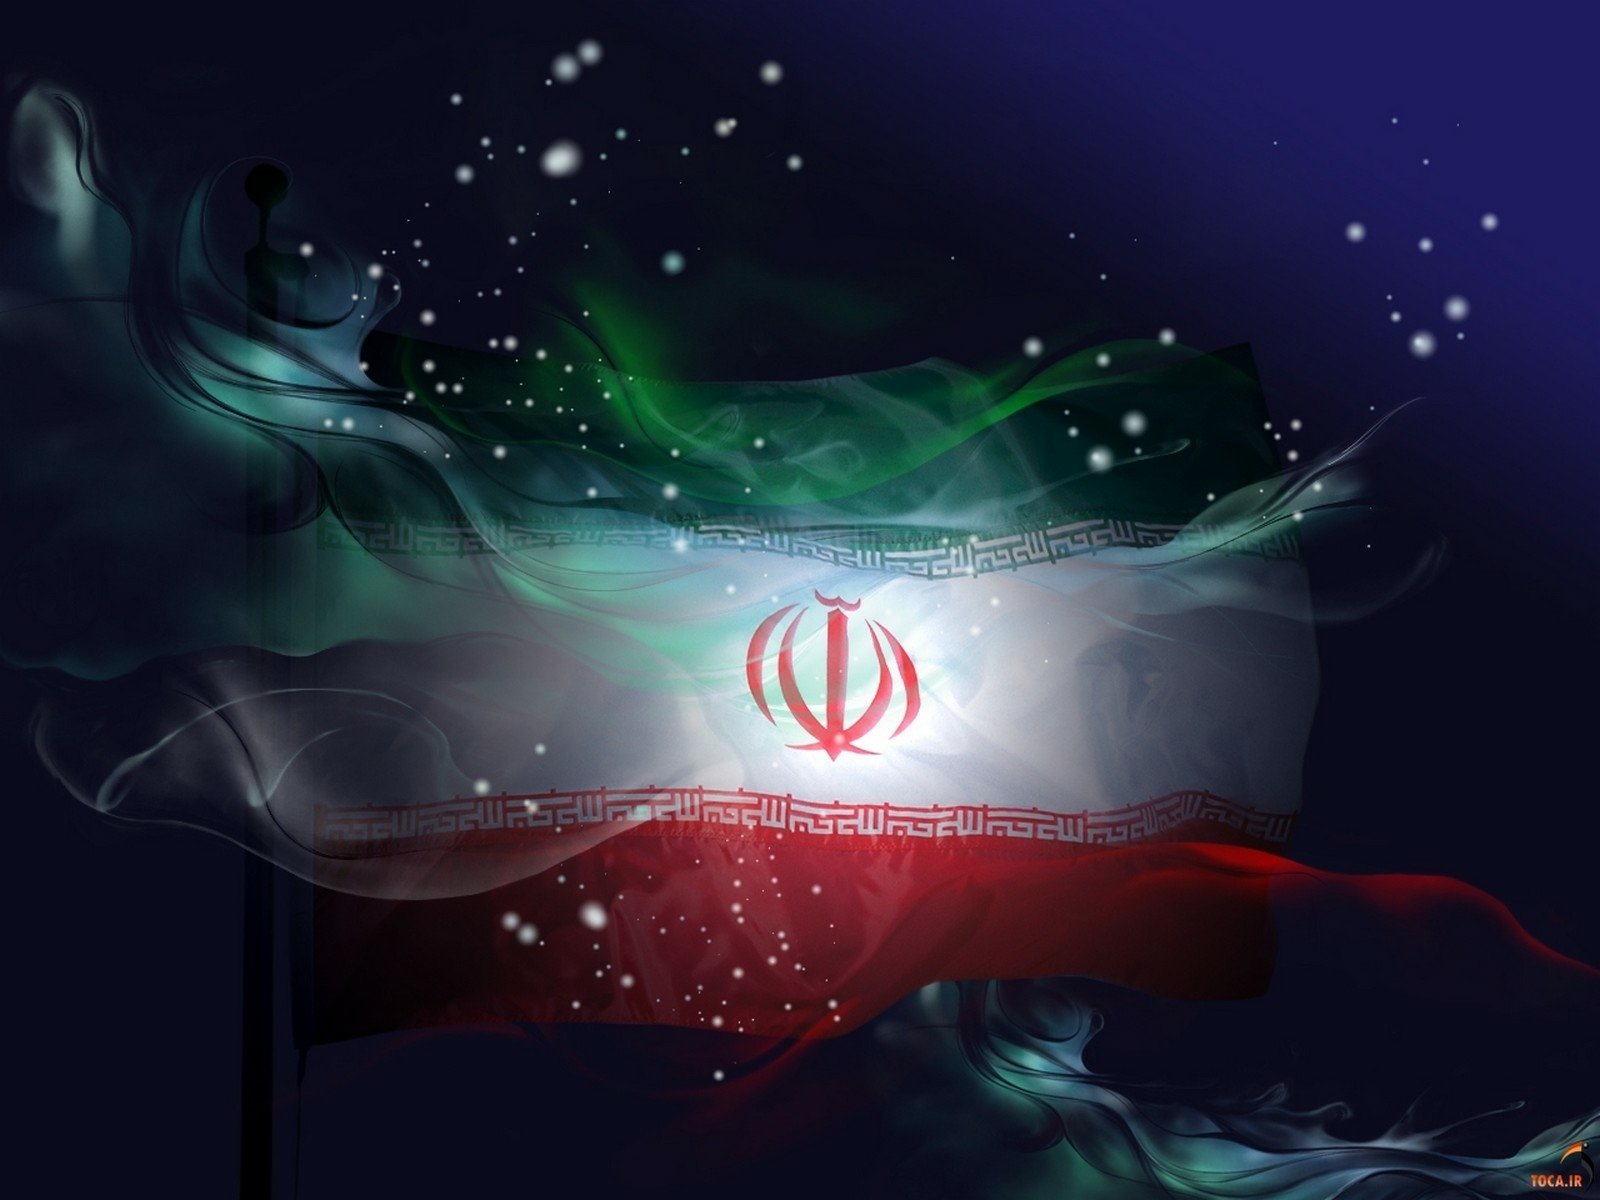 20+ Flag Of Iran HD Wallpapers and Backgrounds